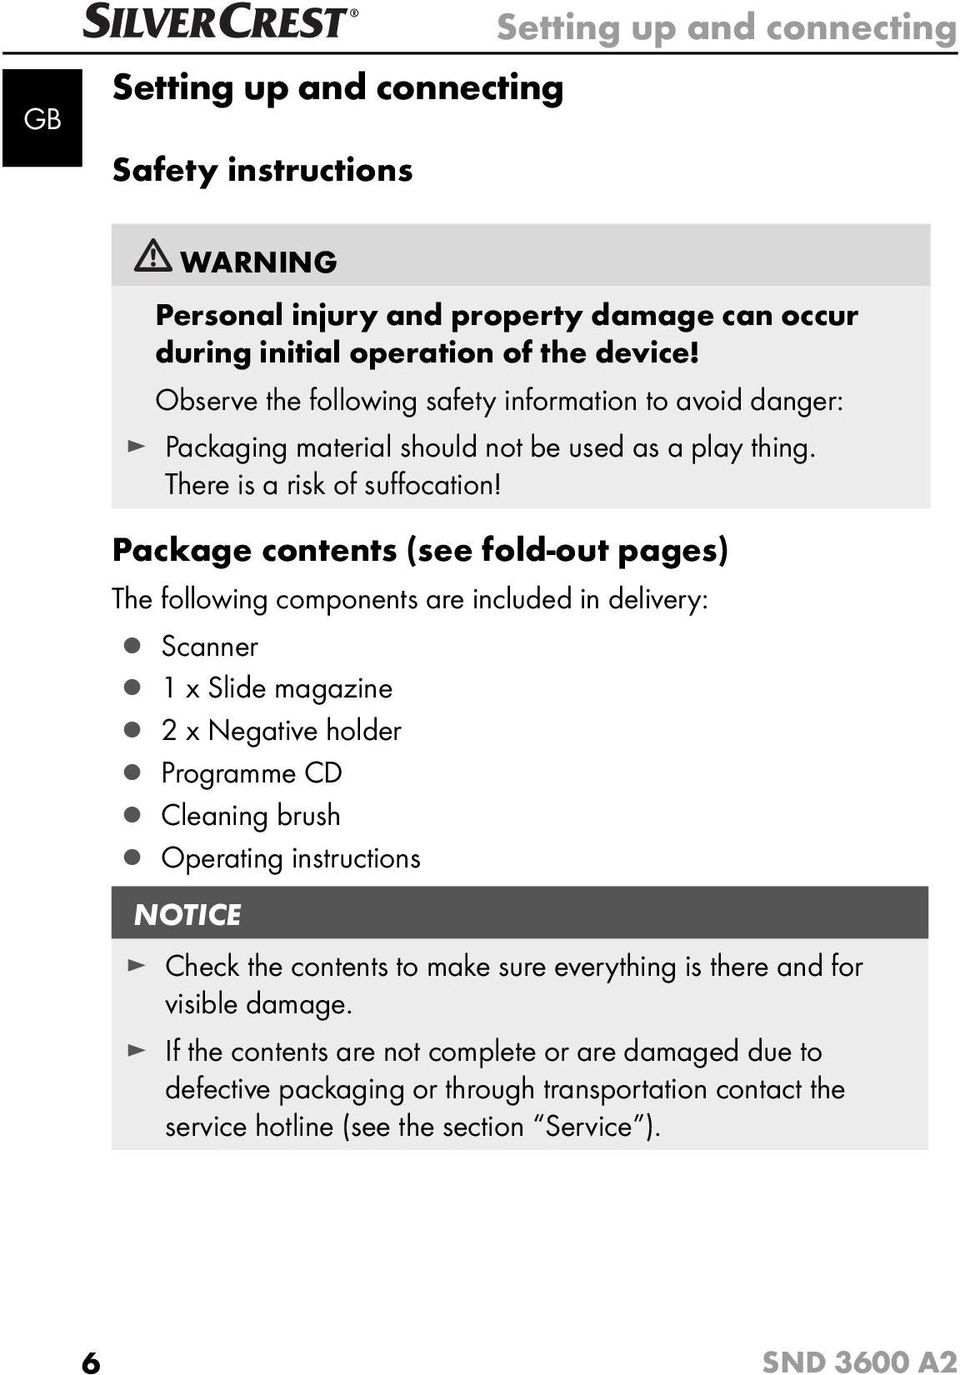 Package contents (see fold-out pages) The following components are included in delivery: Scanner 1 x Slide magazine 2 x Negative holder Programme CD Cleaning brush Operating instructions